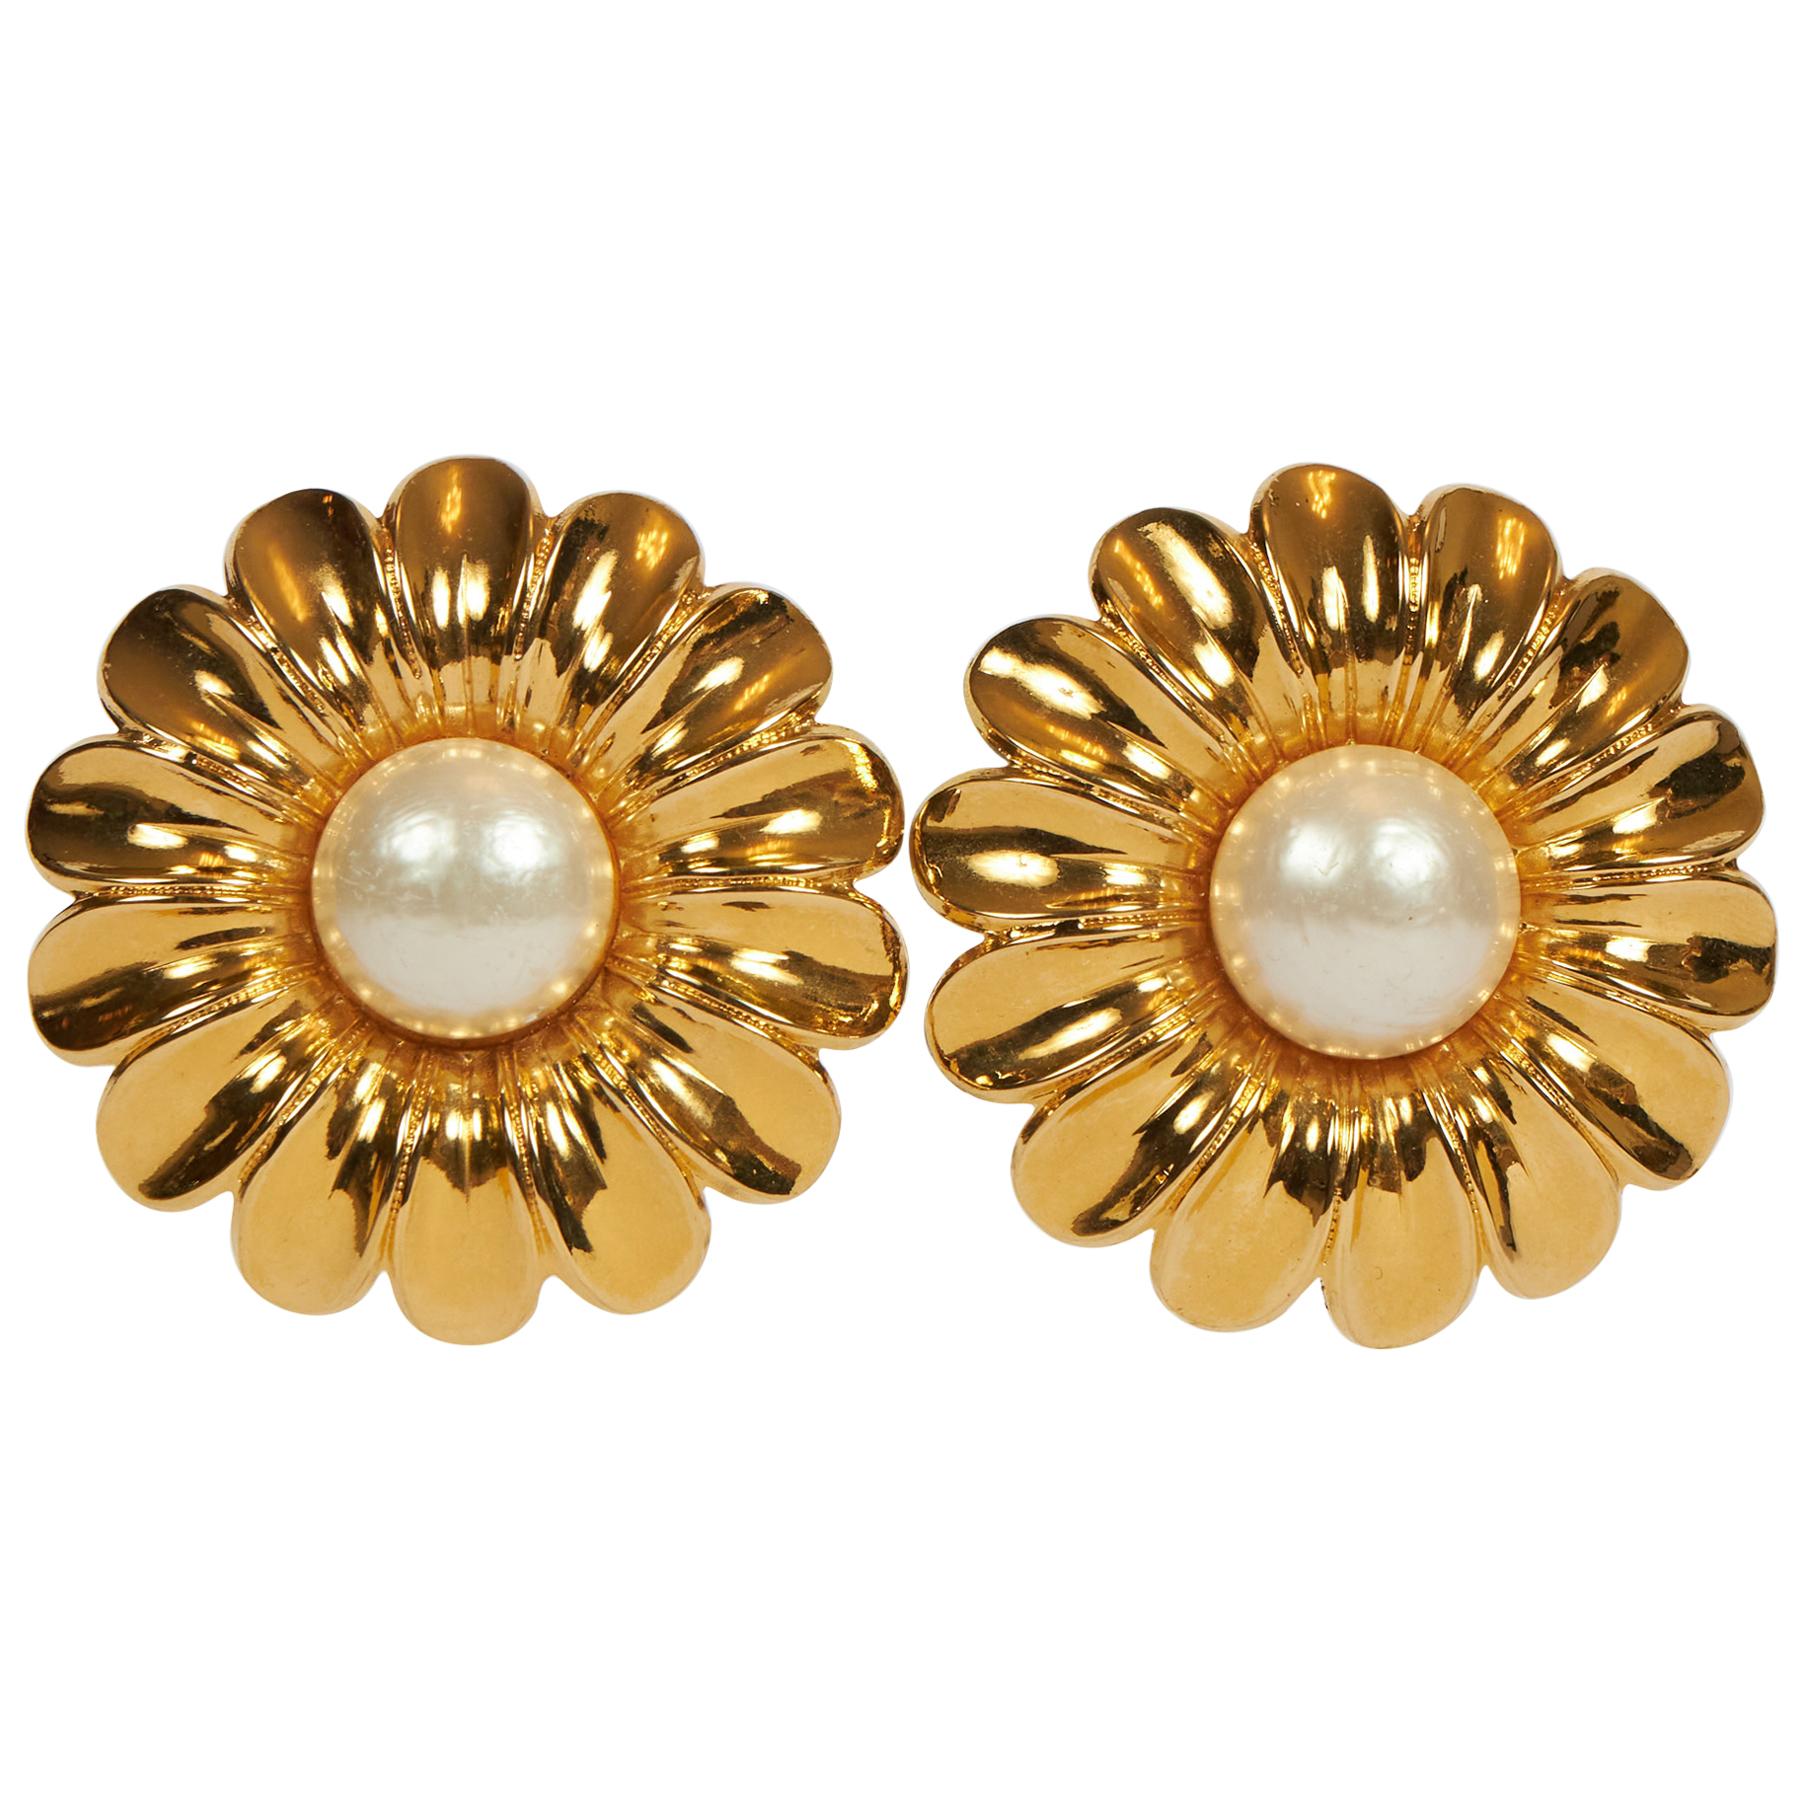 Rare 1970's Chanel Oversized Daisy Pearl Earrings For Sale